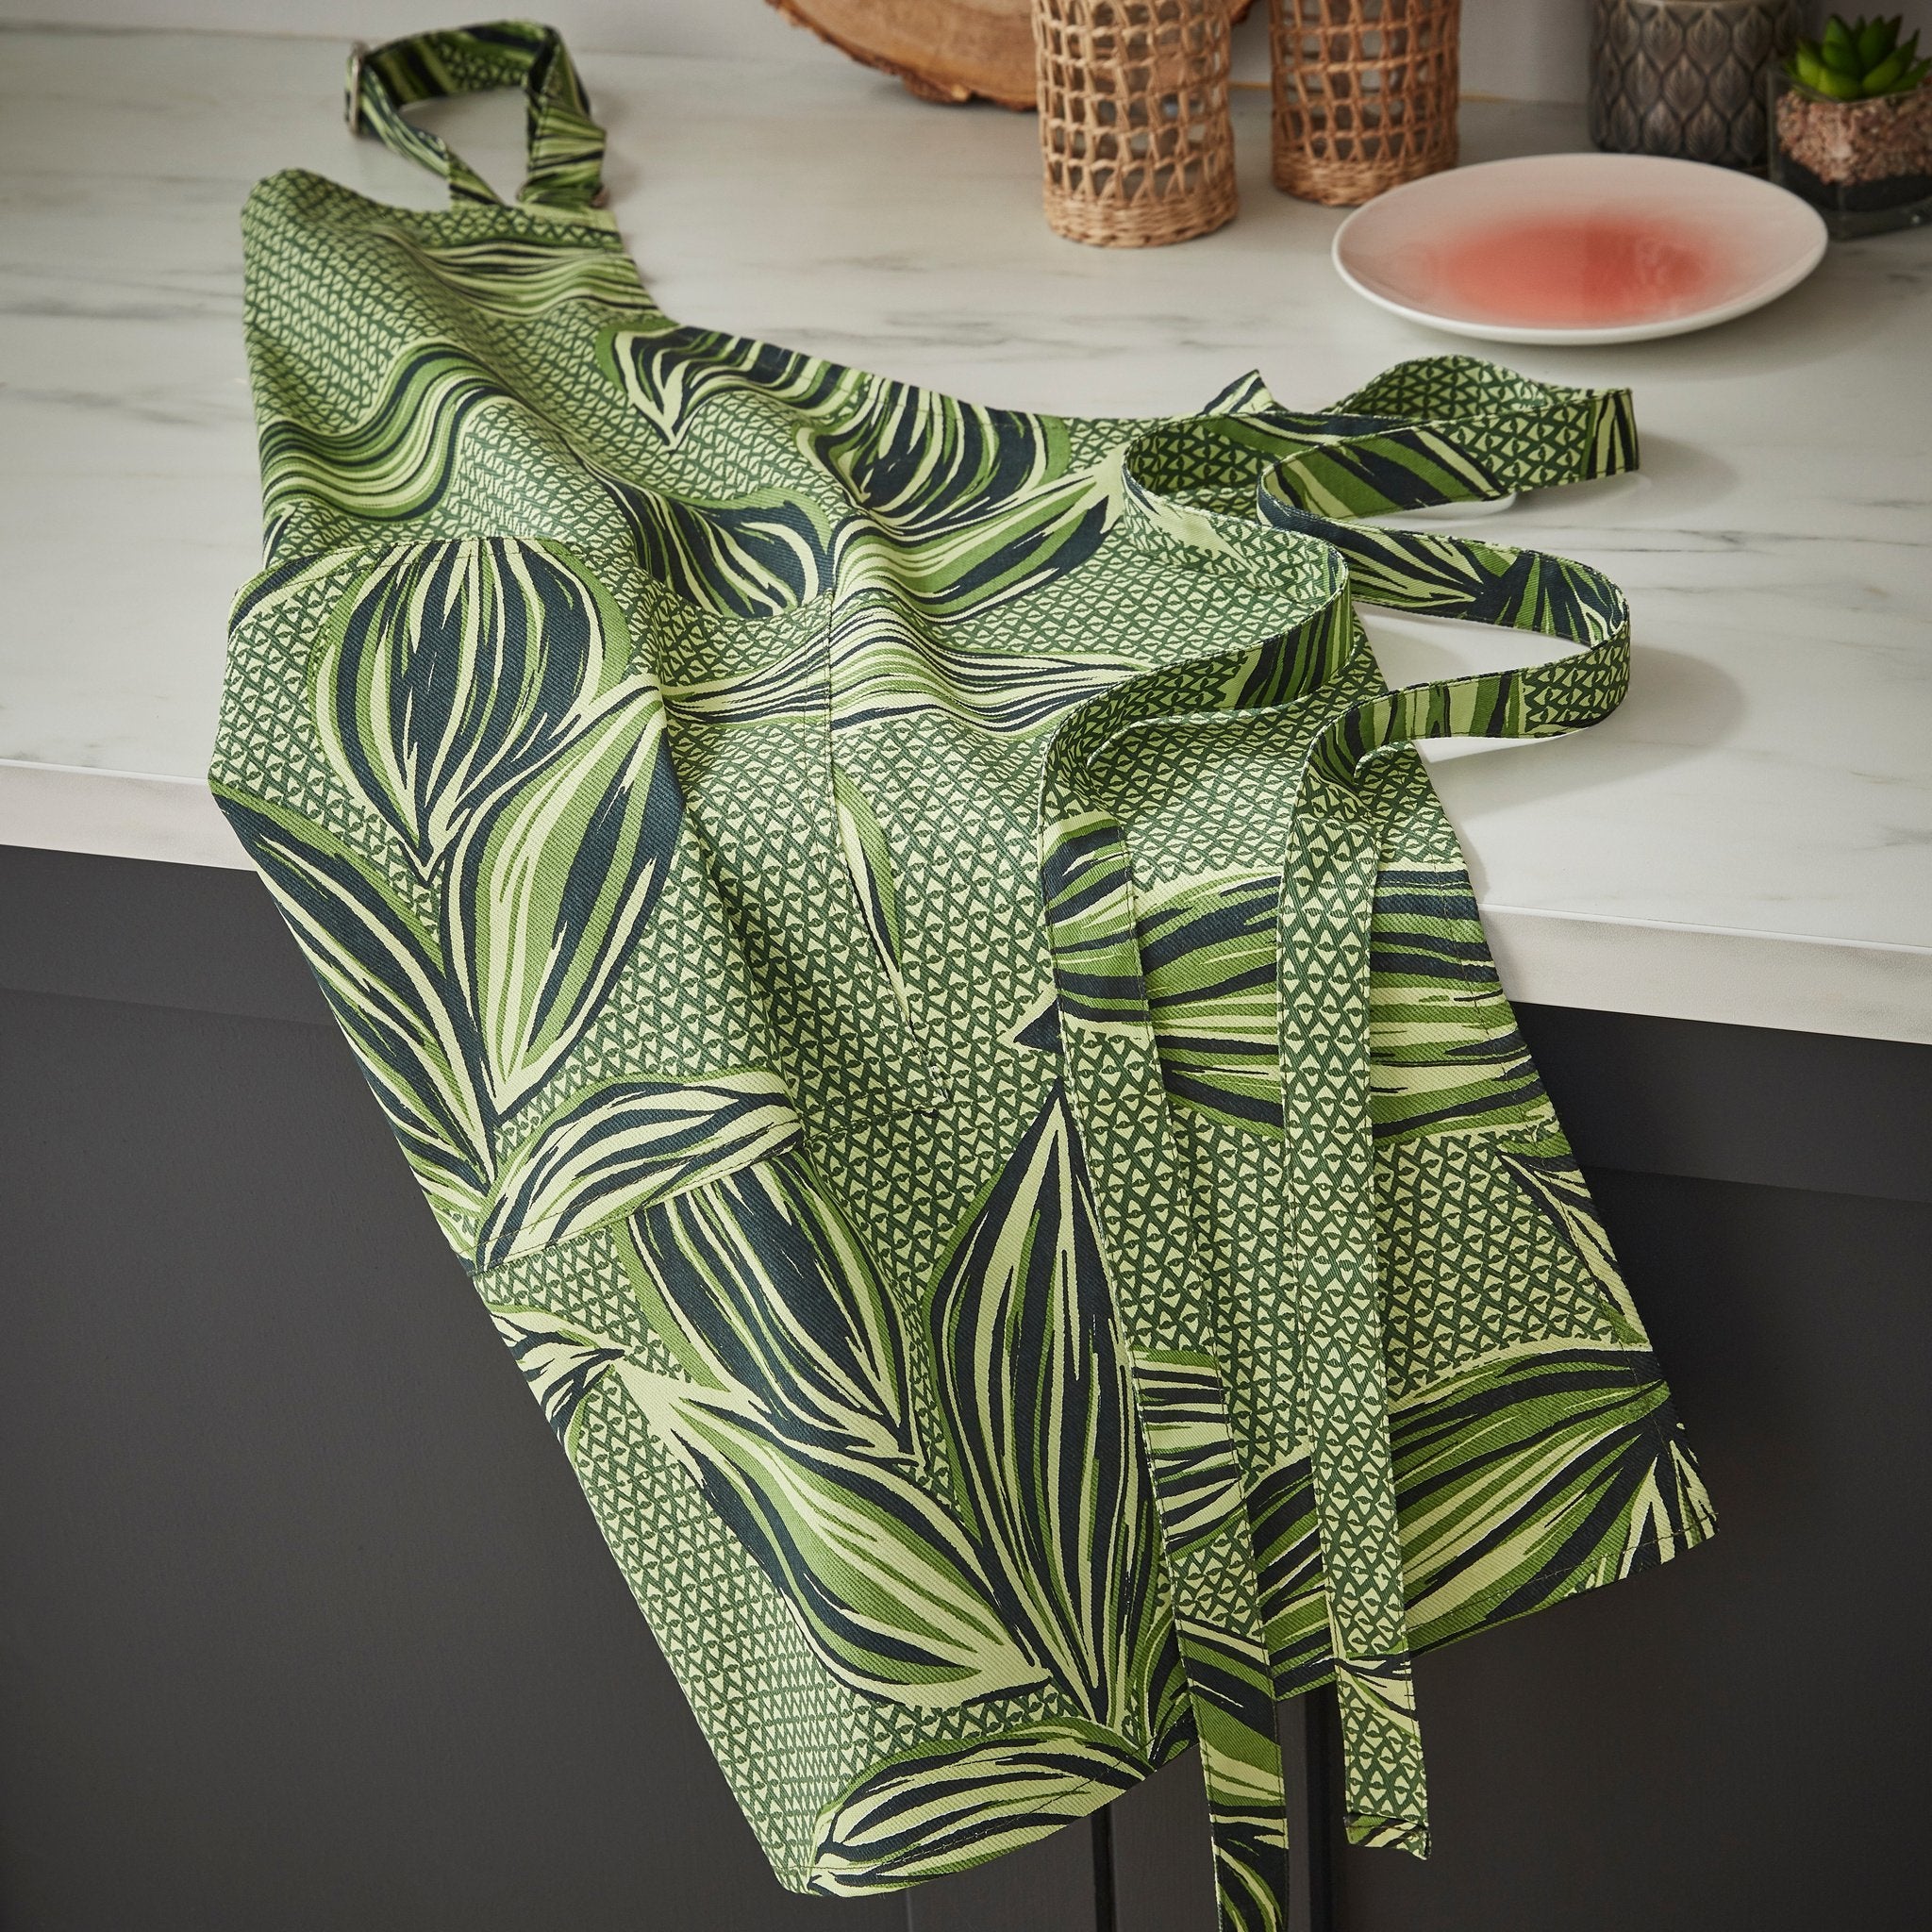 Ulster Weavers Cotton Apron - Geo Leaves (100% Cotton) - Apron - Ulster Weavers